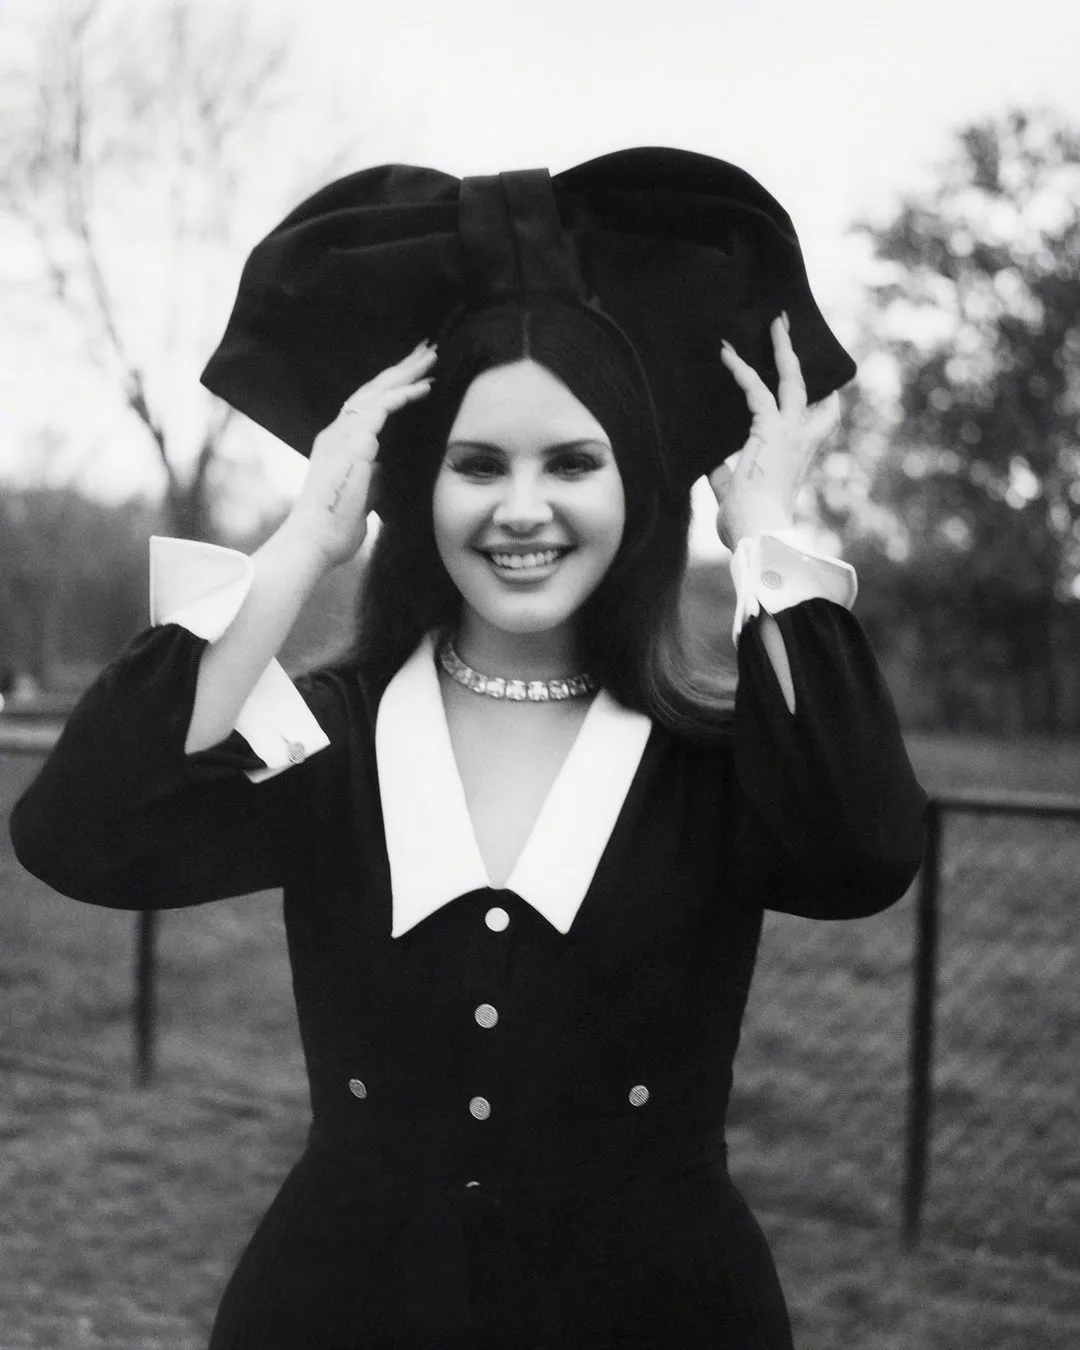 Lana Del Rey's new photo of "W" magazine "Music" special issue